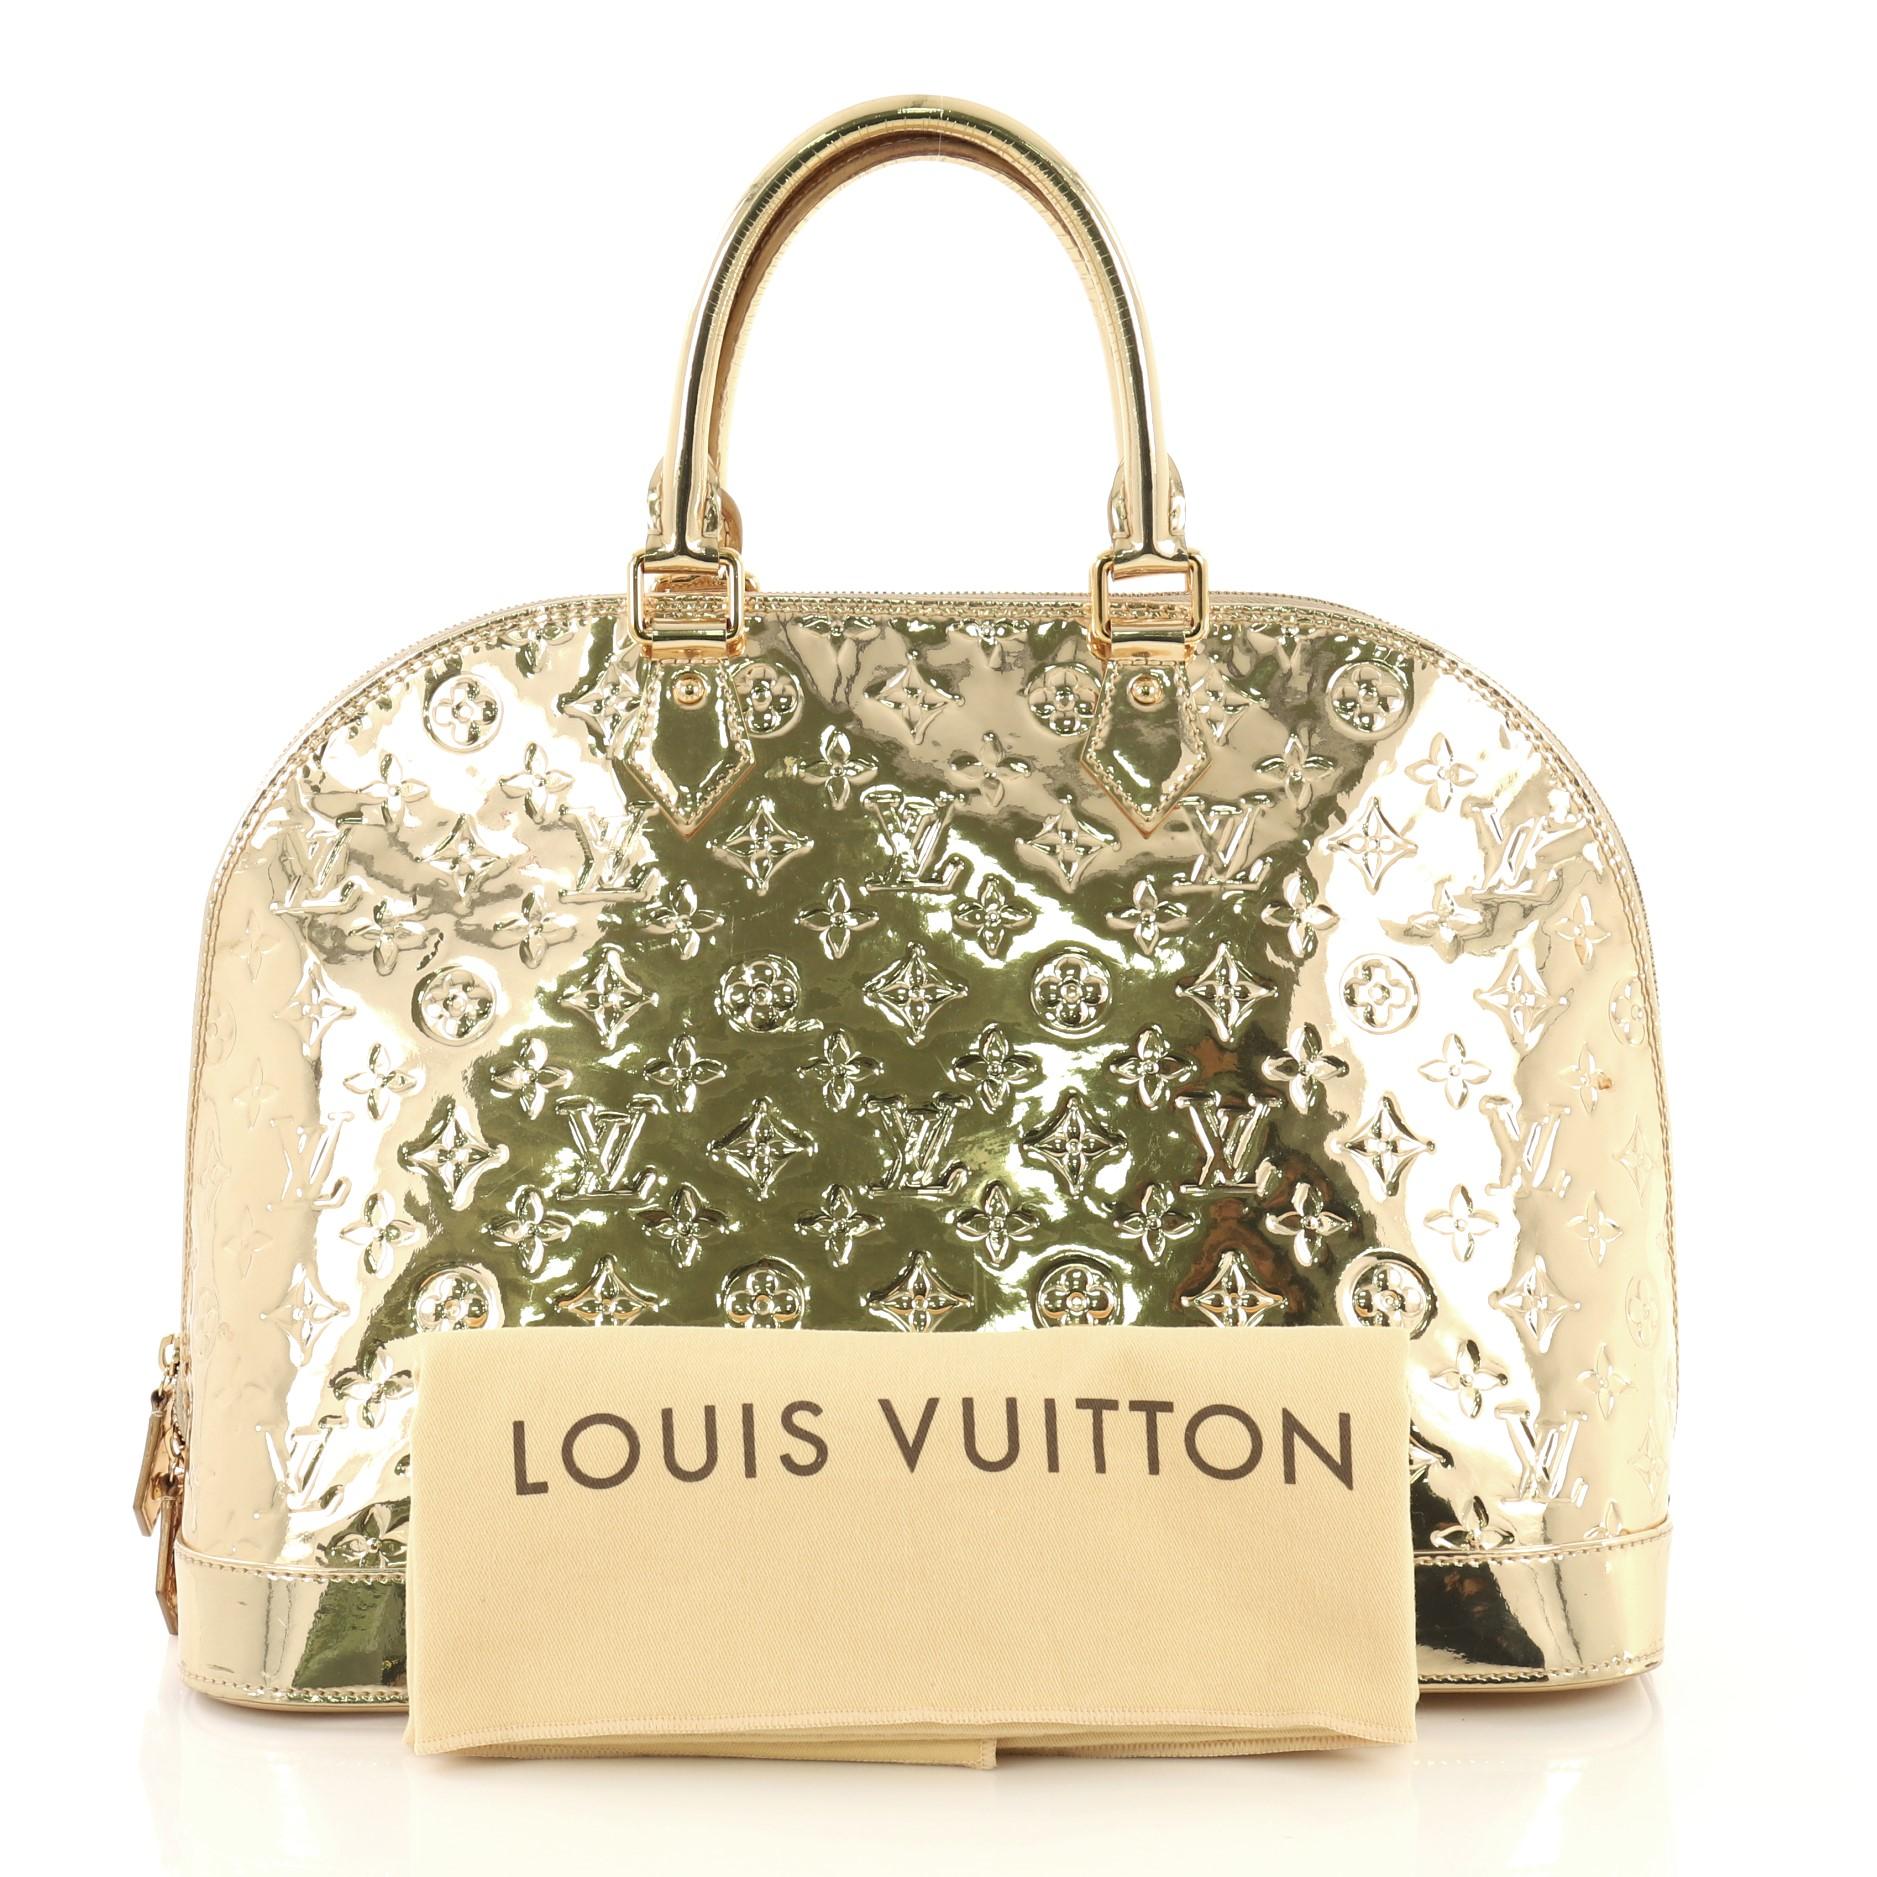 This Louis Vuitton Alma Handbag Miroir PVC GM, crafted from gold miroir PVC, features dual rolled handles, protective base studs, and gold-tone hardware. Its zip closure opens to a neutral fabric interior with slip pockets. Authenticity code reads: